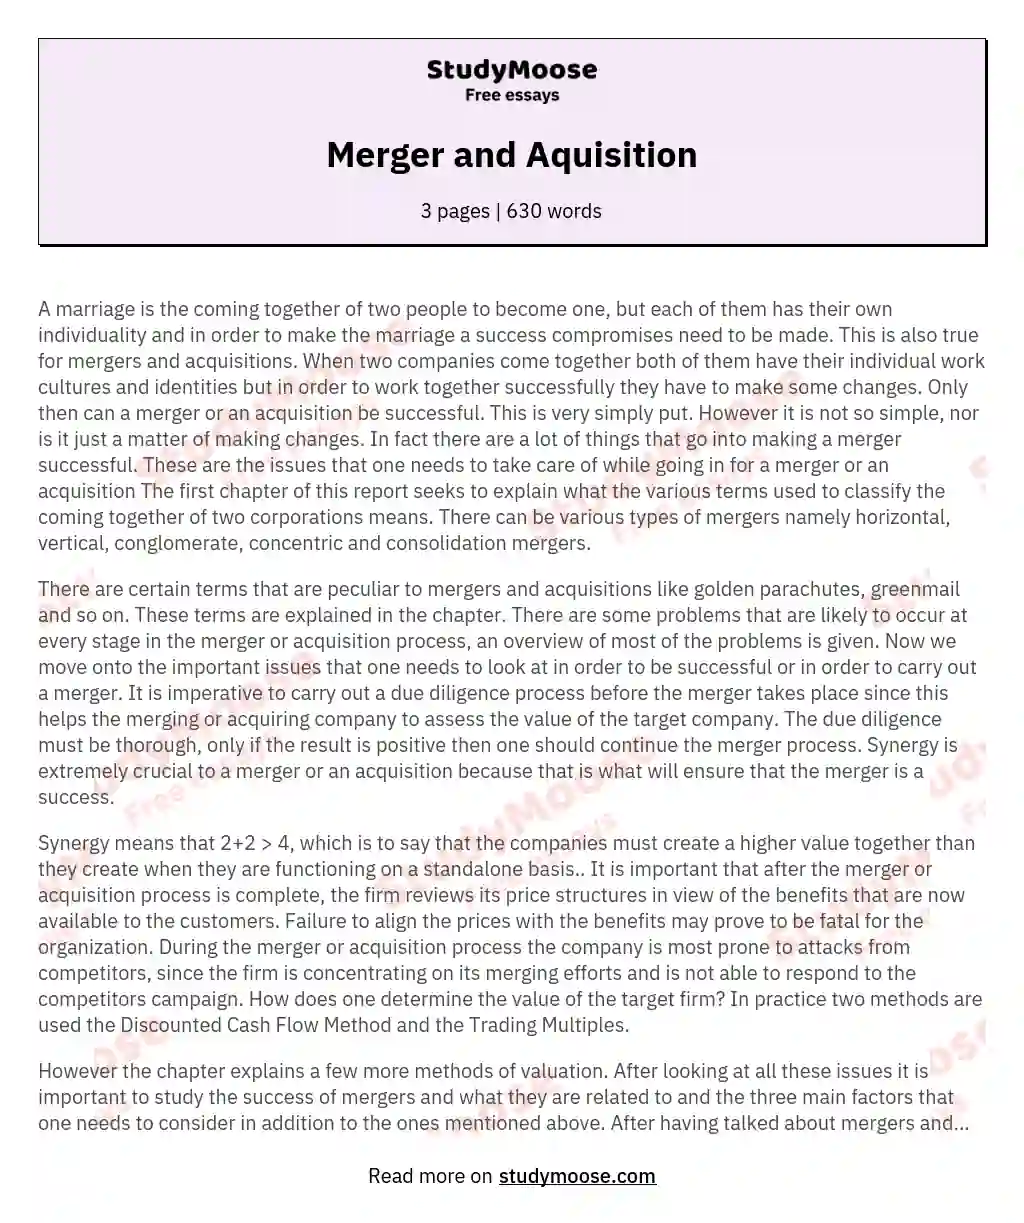 Merger and Aquisition essay